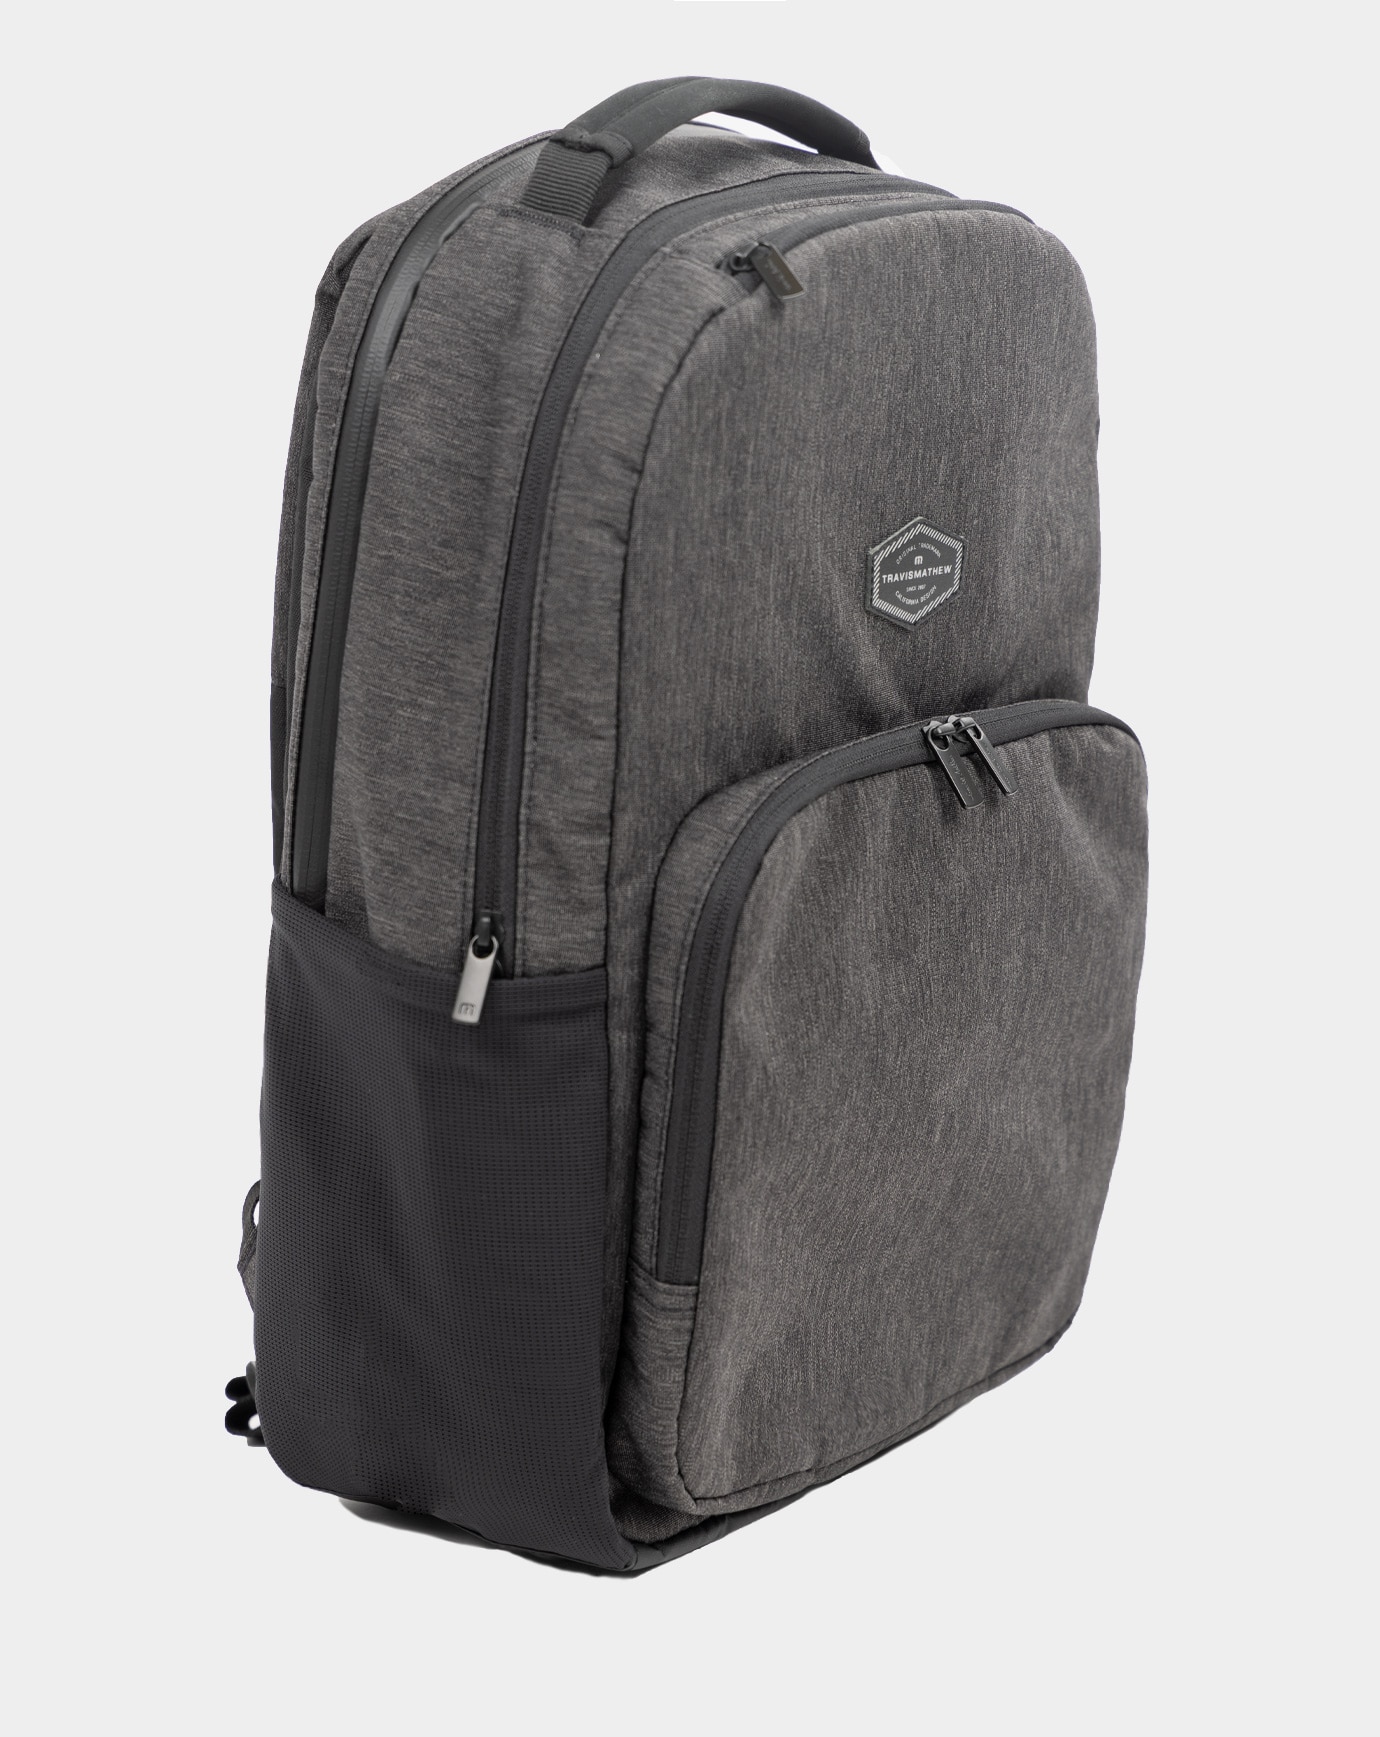 STEADYPACK BACKPACK Image Thumbnail 2